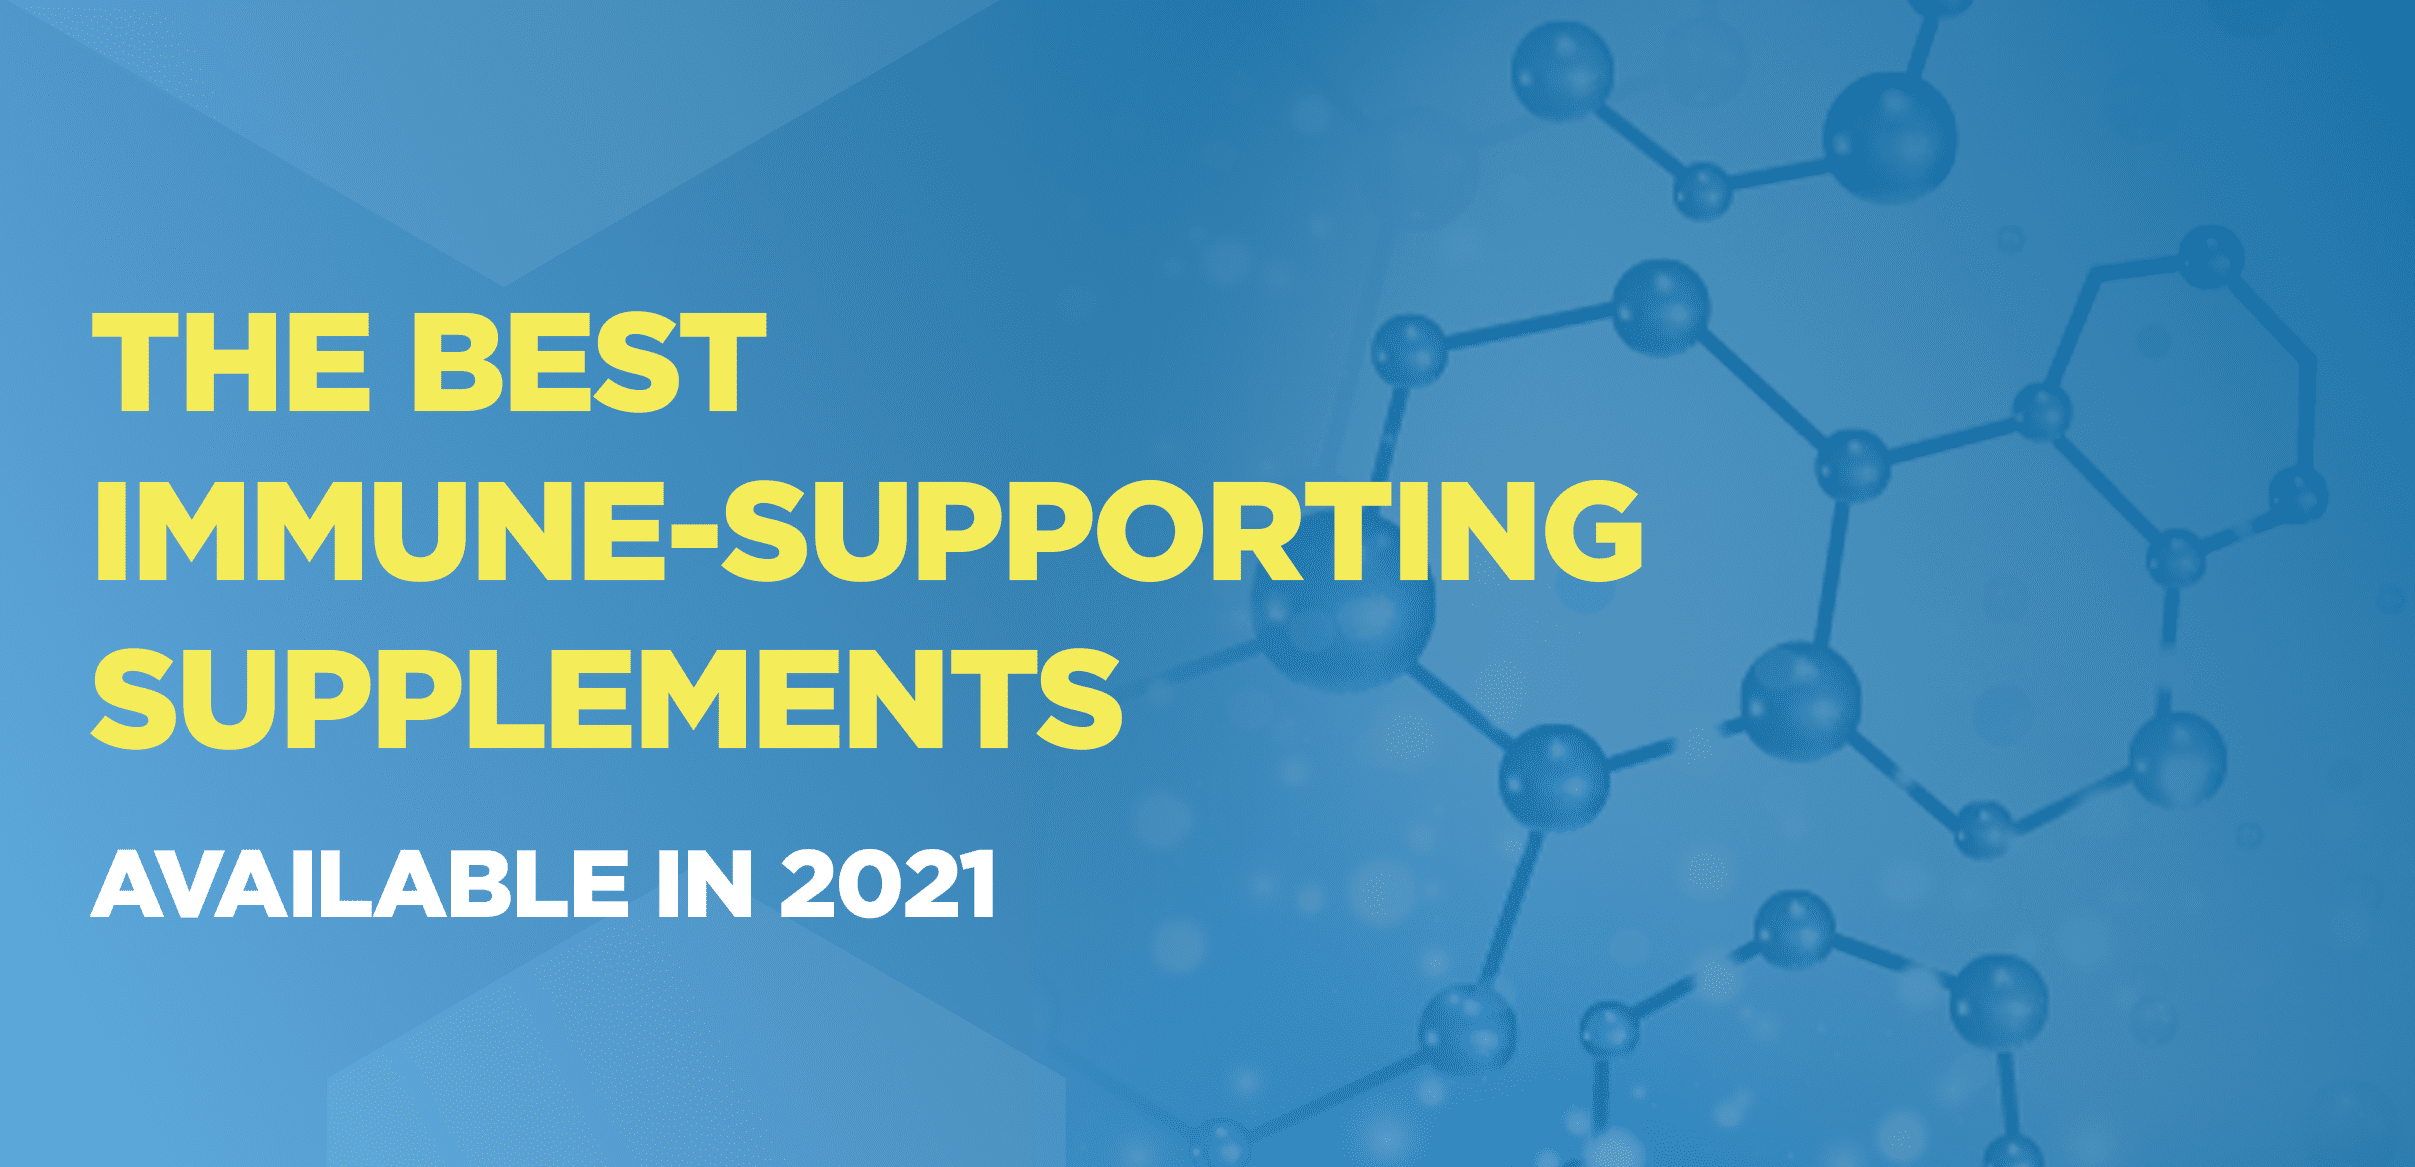 The Best Immune-Supporting Supplements Available in 2021